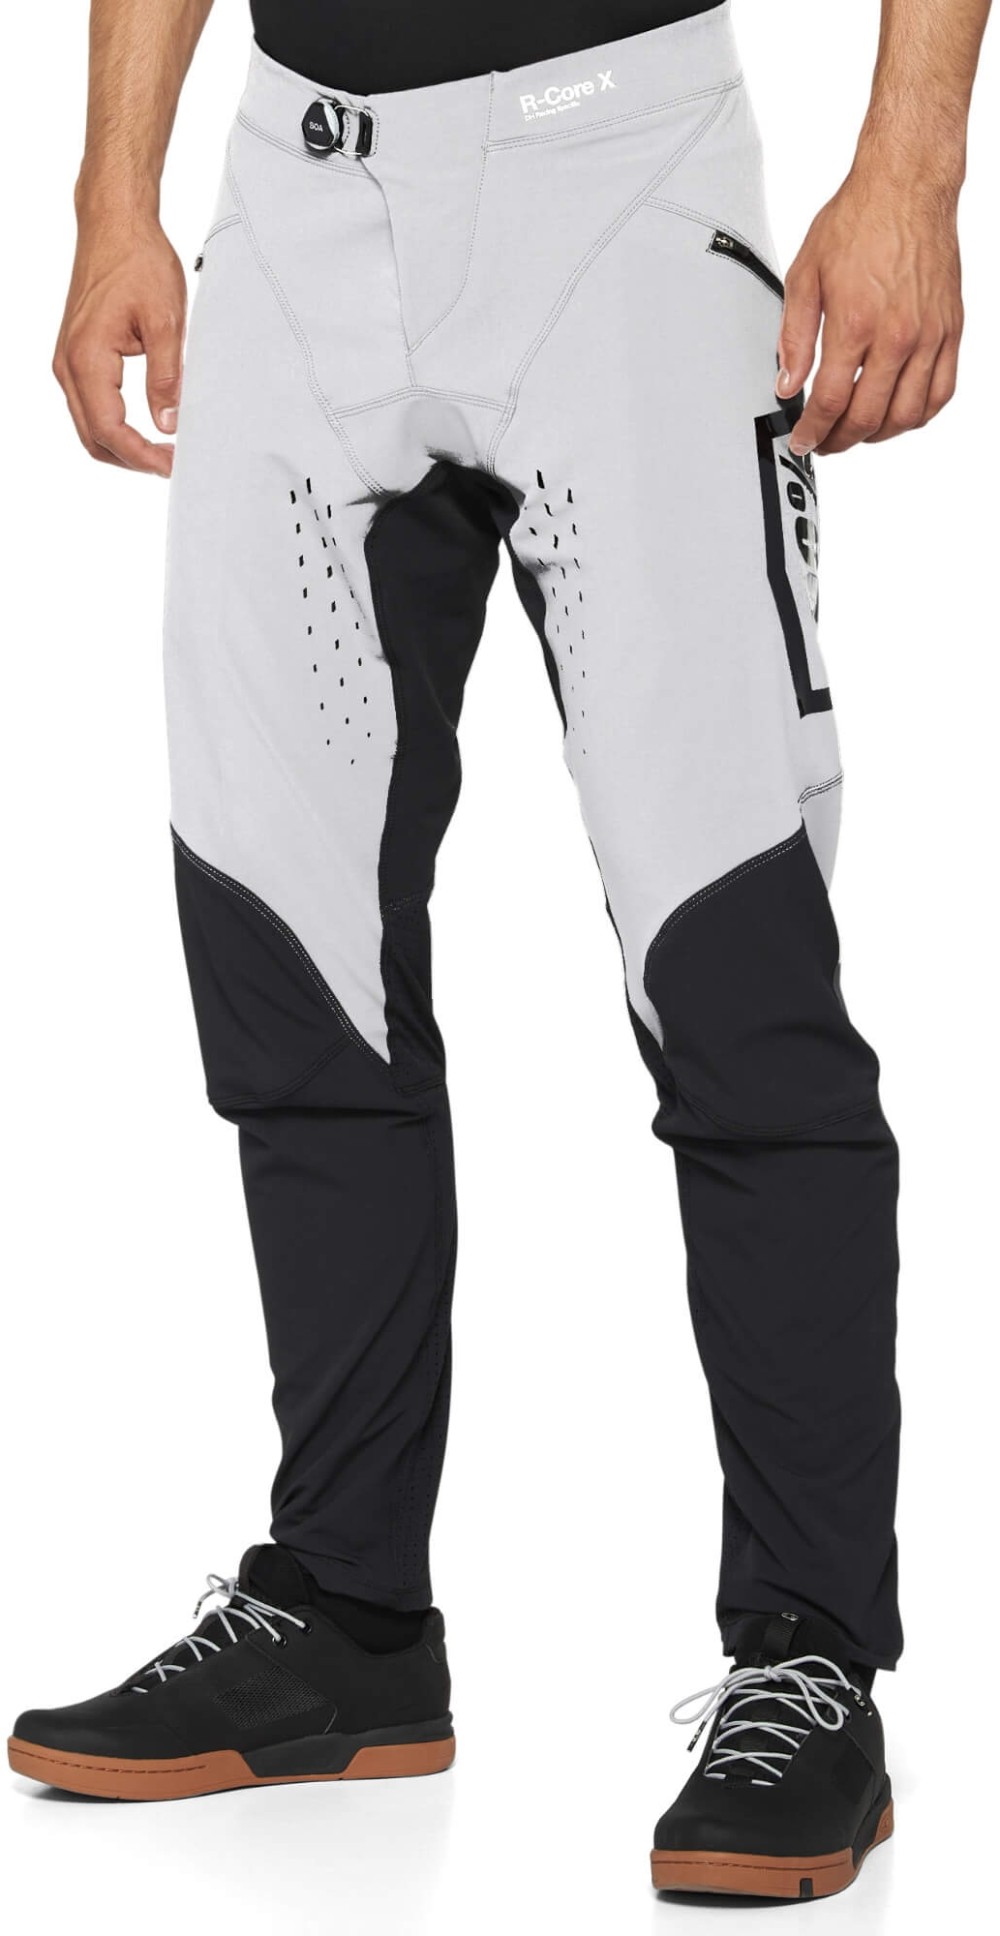 R-Core X MTB Cycling Trousers image 0